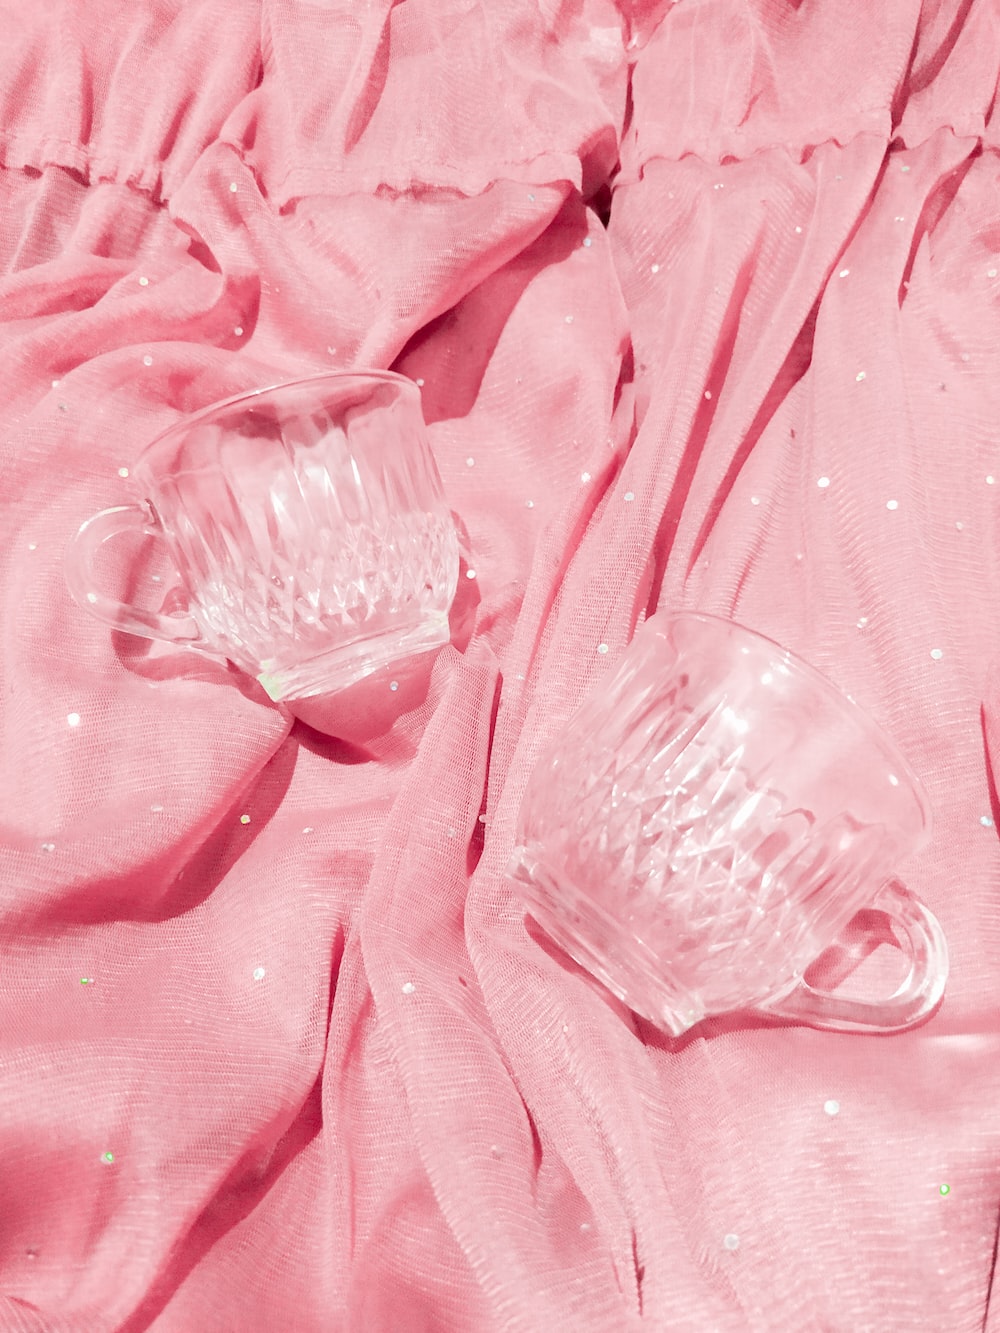 Two glasses sitting on a pink tablecloth - Soft pink